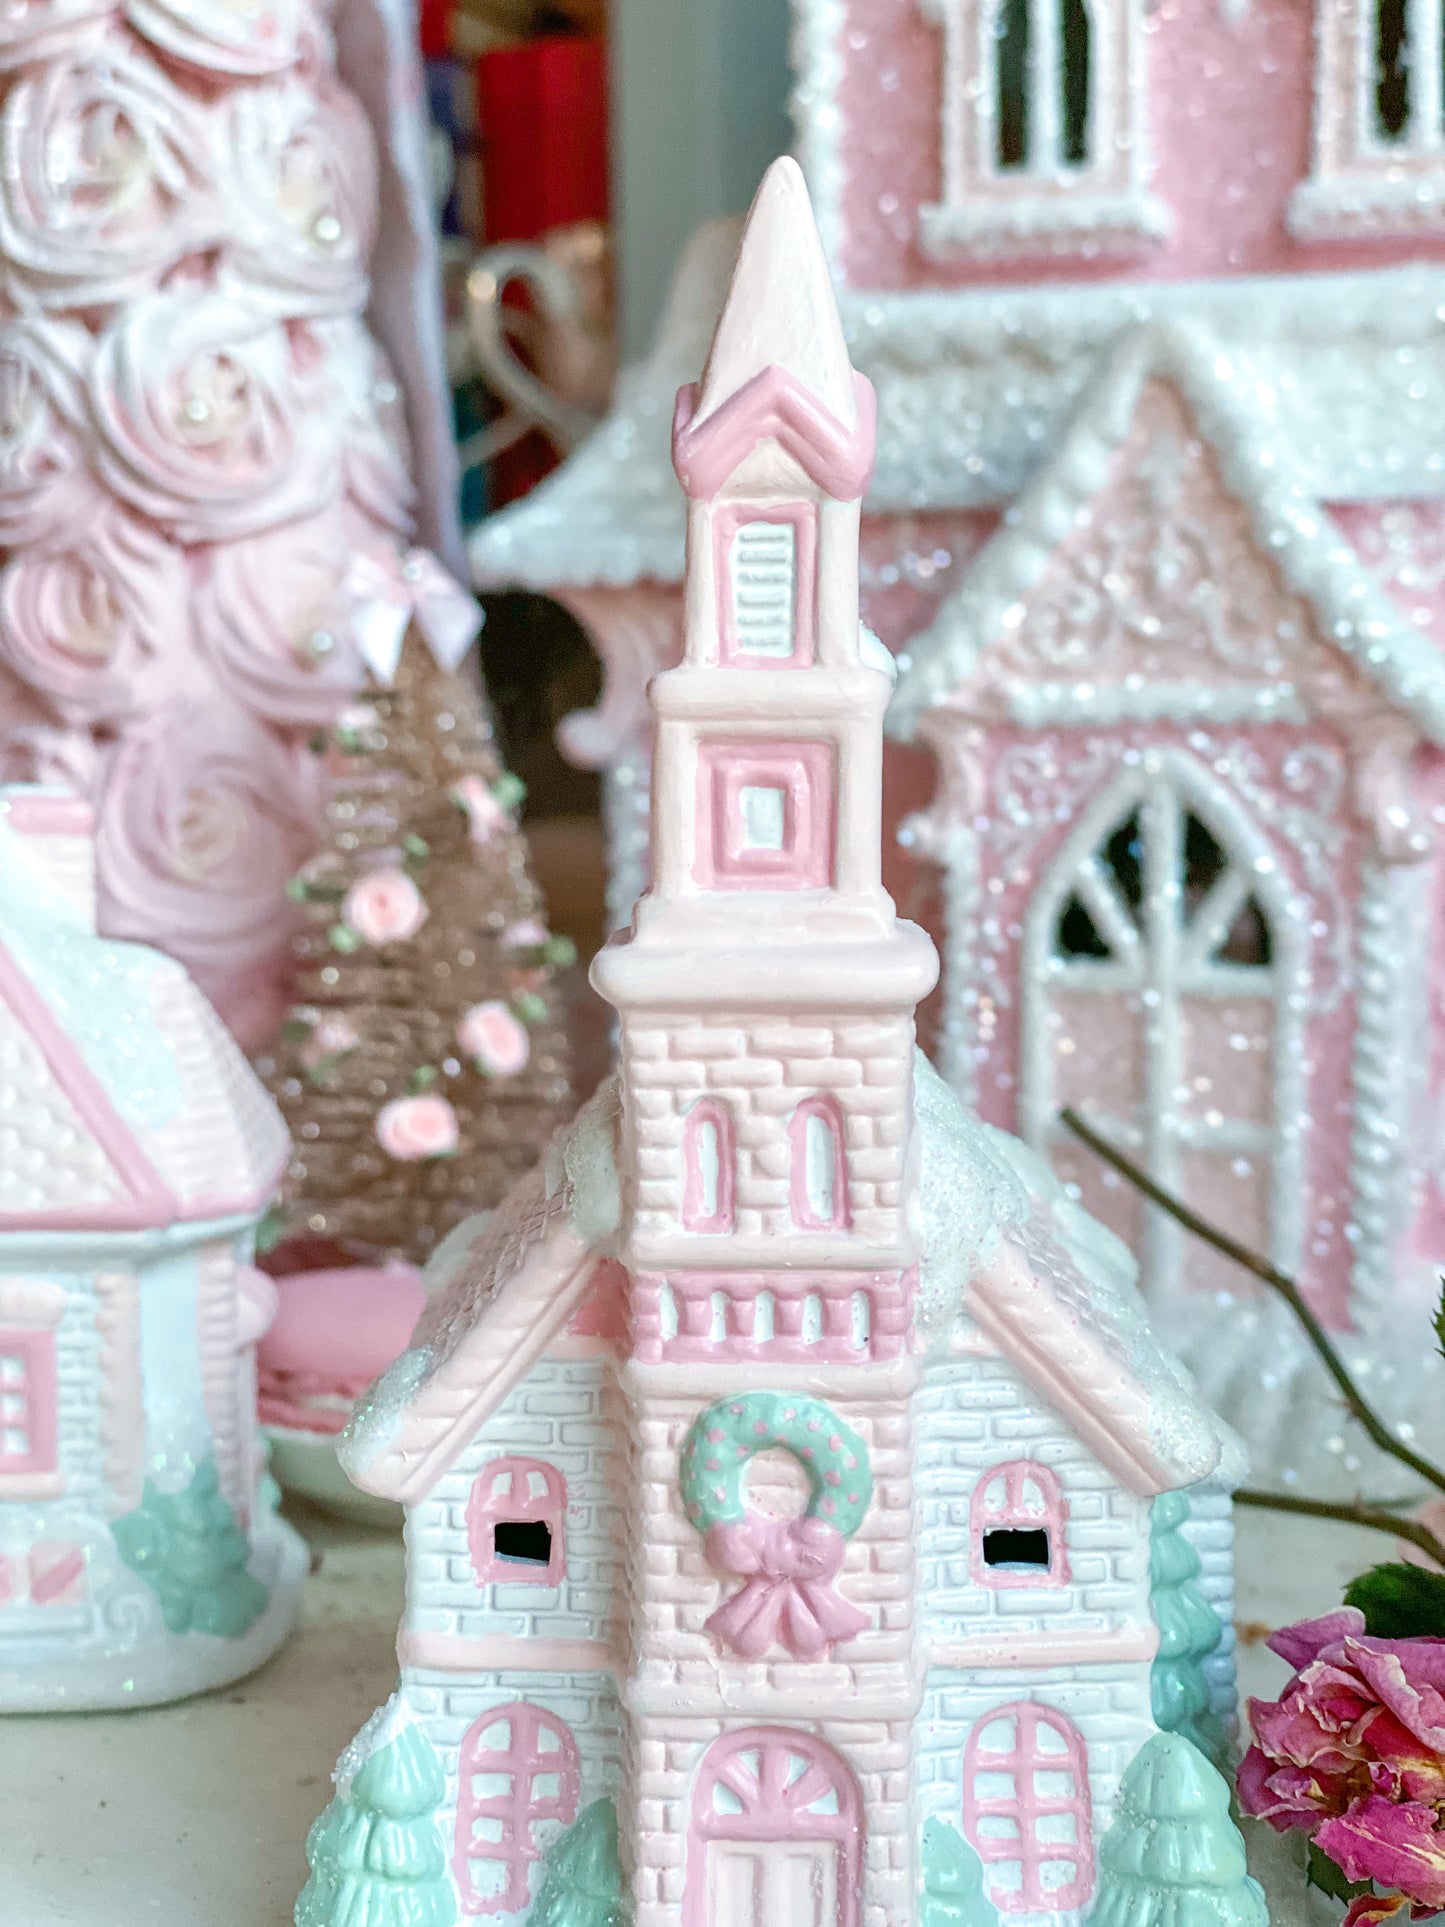 Bespoke Hand Painted Pastel Pink and White Christmas Village Petite St Nicholas Chapel Pre-Order